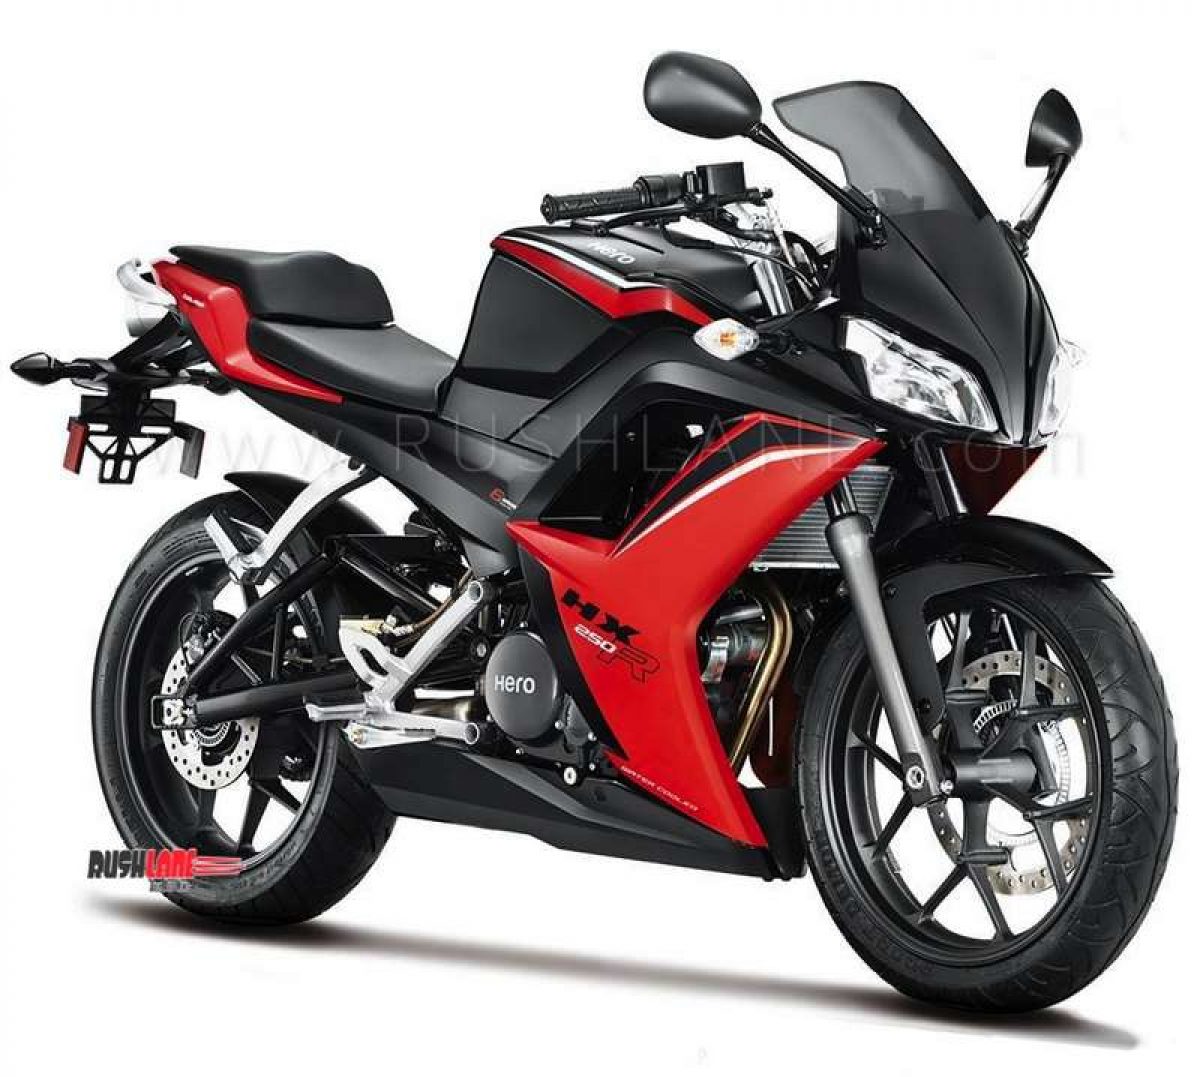 2019 Hero Karizma May Get Styling From Hx250 Engine From Xtreme 200